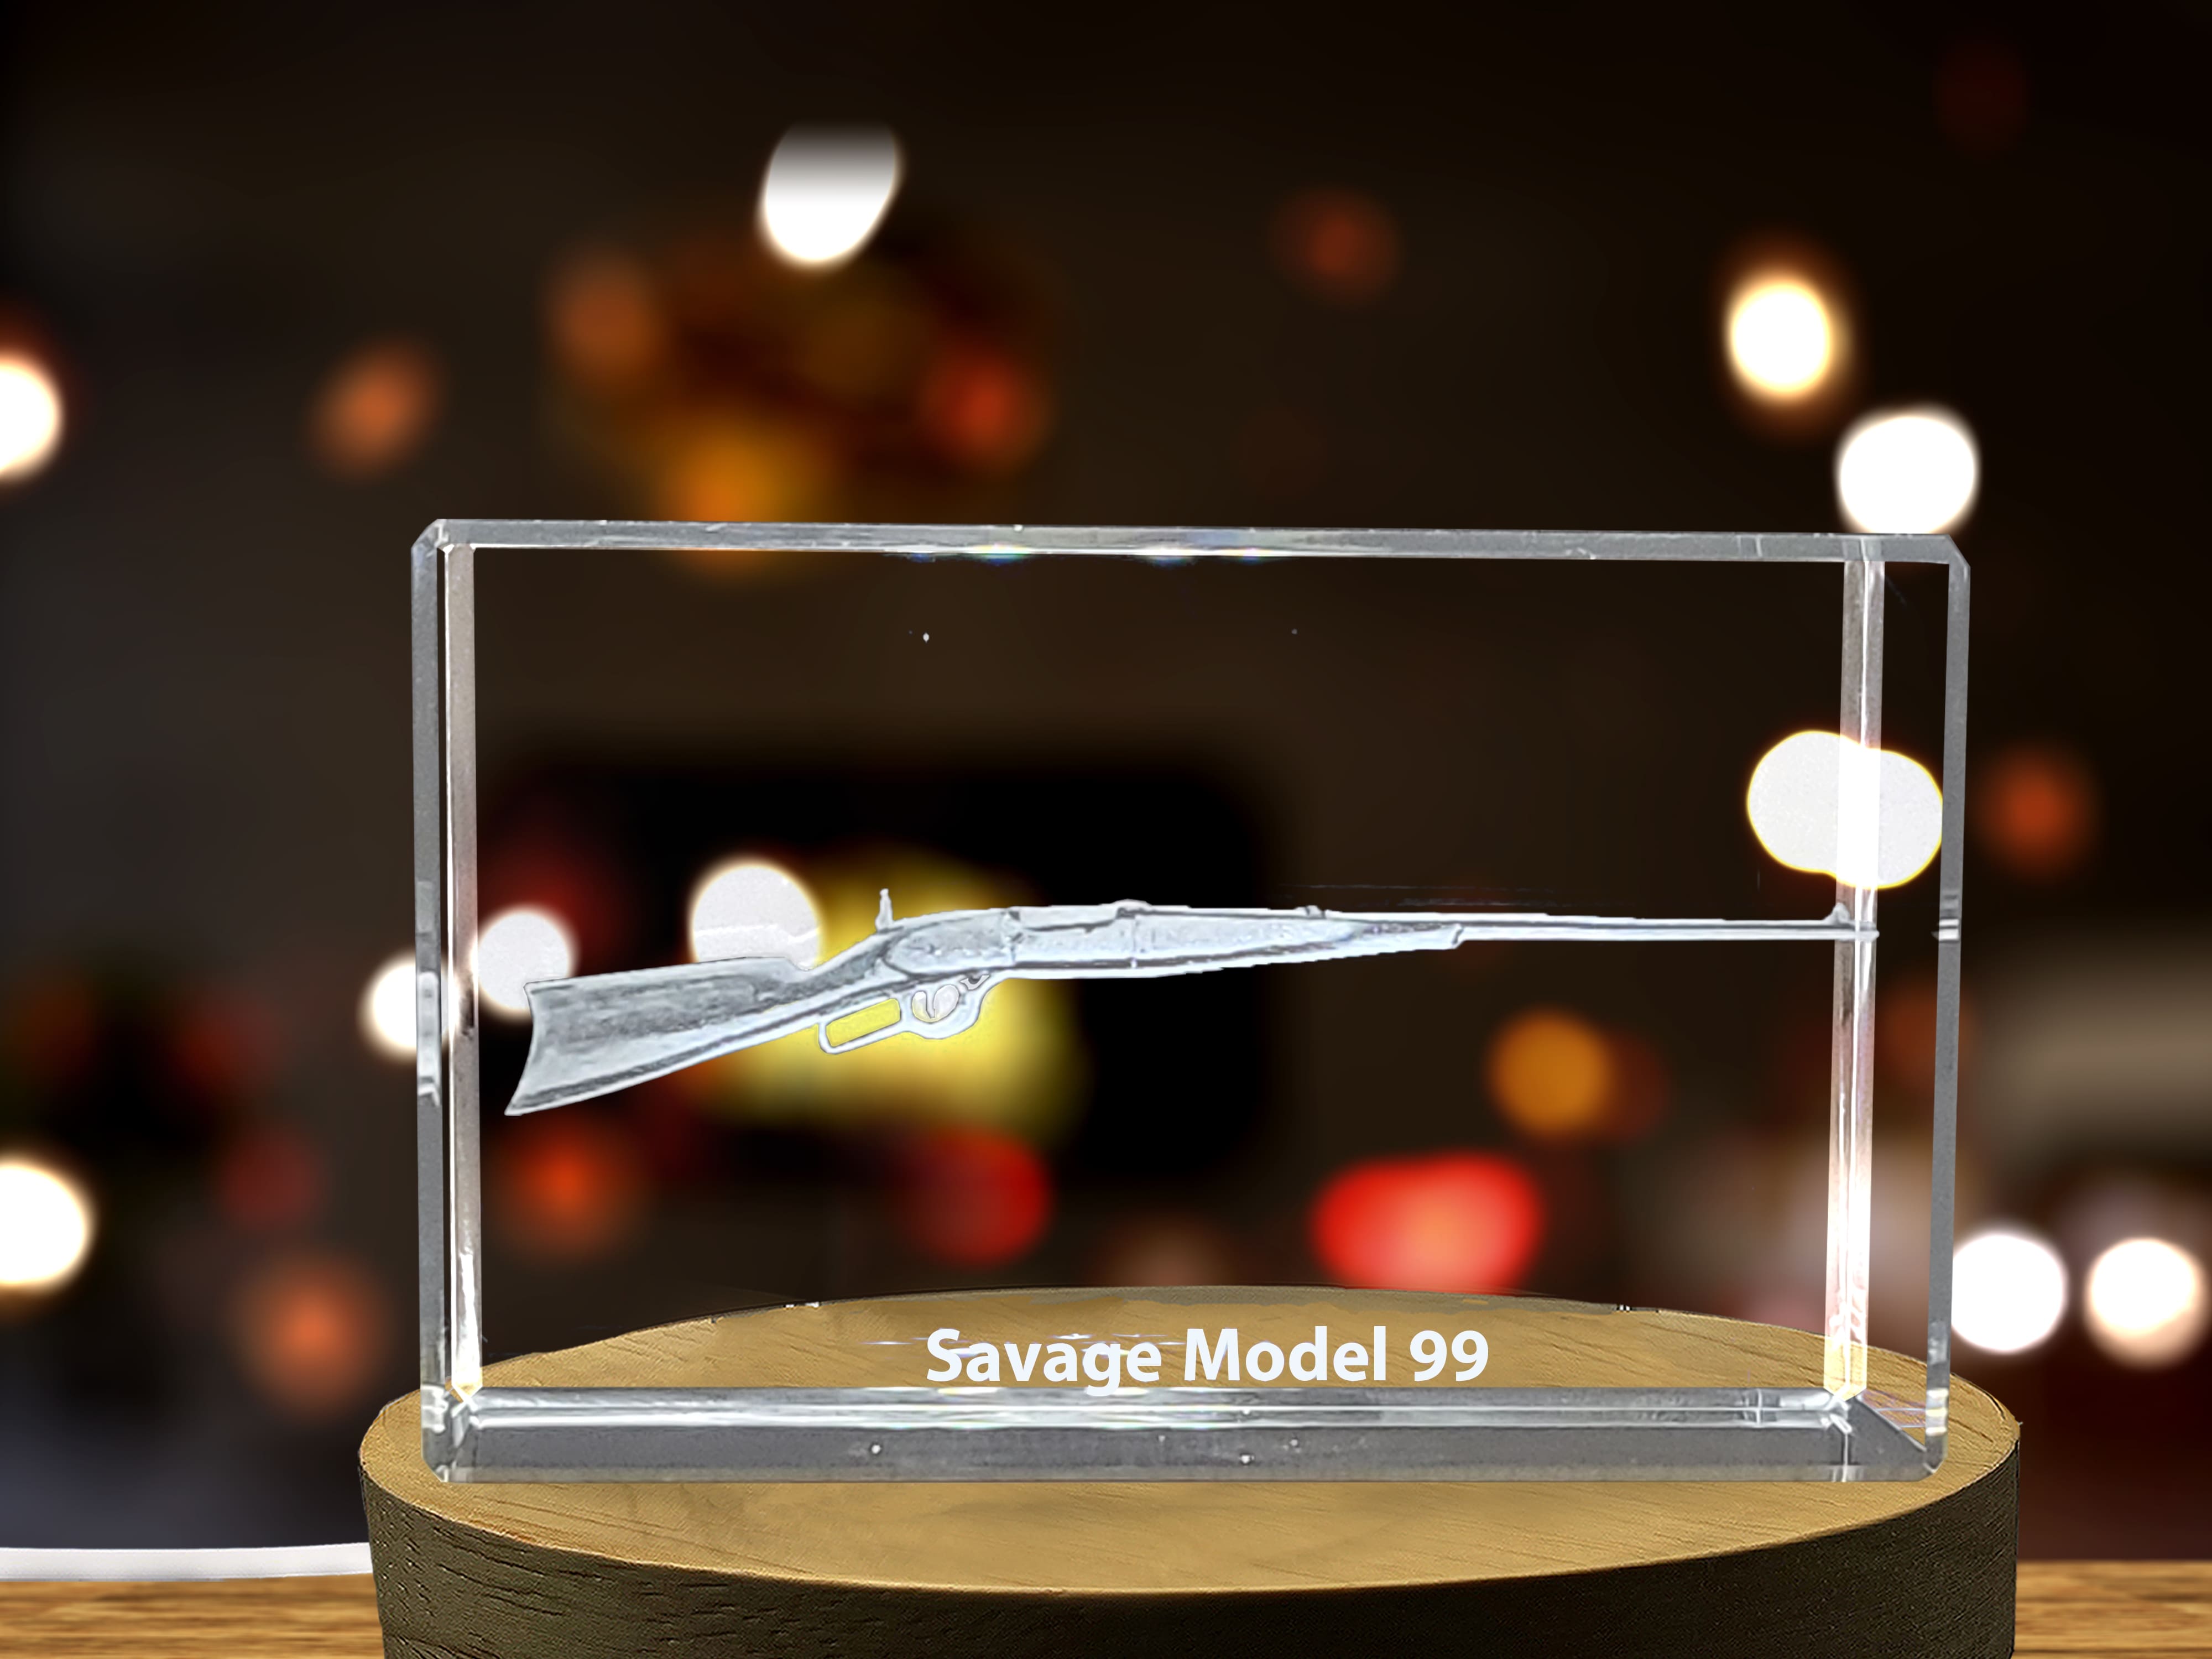 Savage Model 99 Lever Action Rifle Design Laser Engraved Crystal Display A&B Crystal Collection